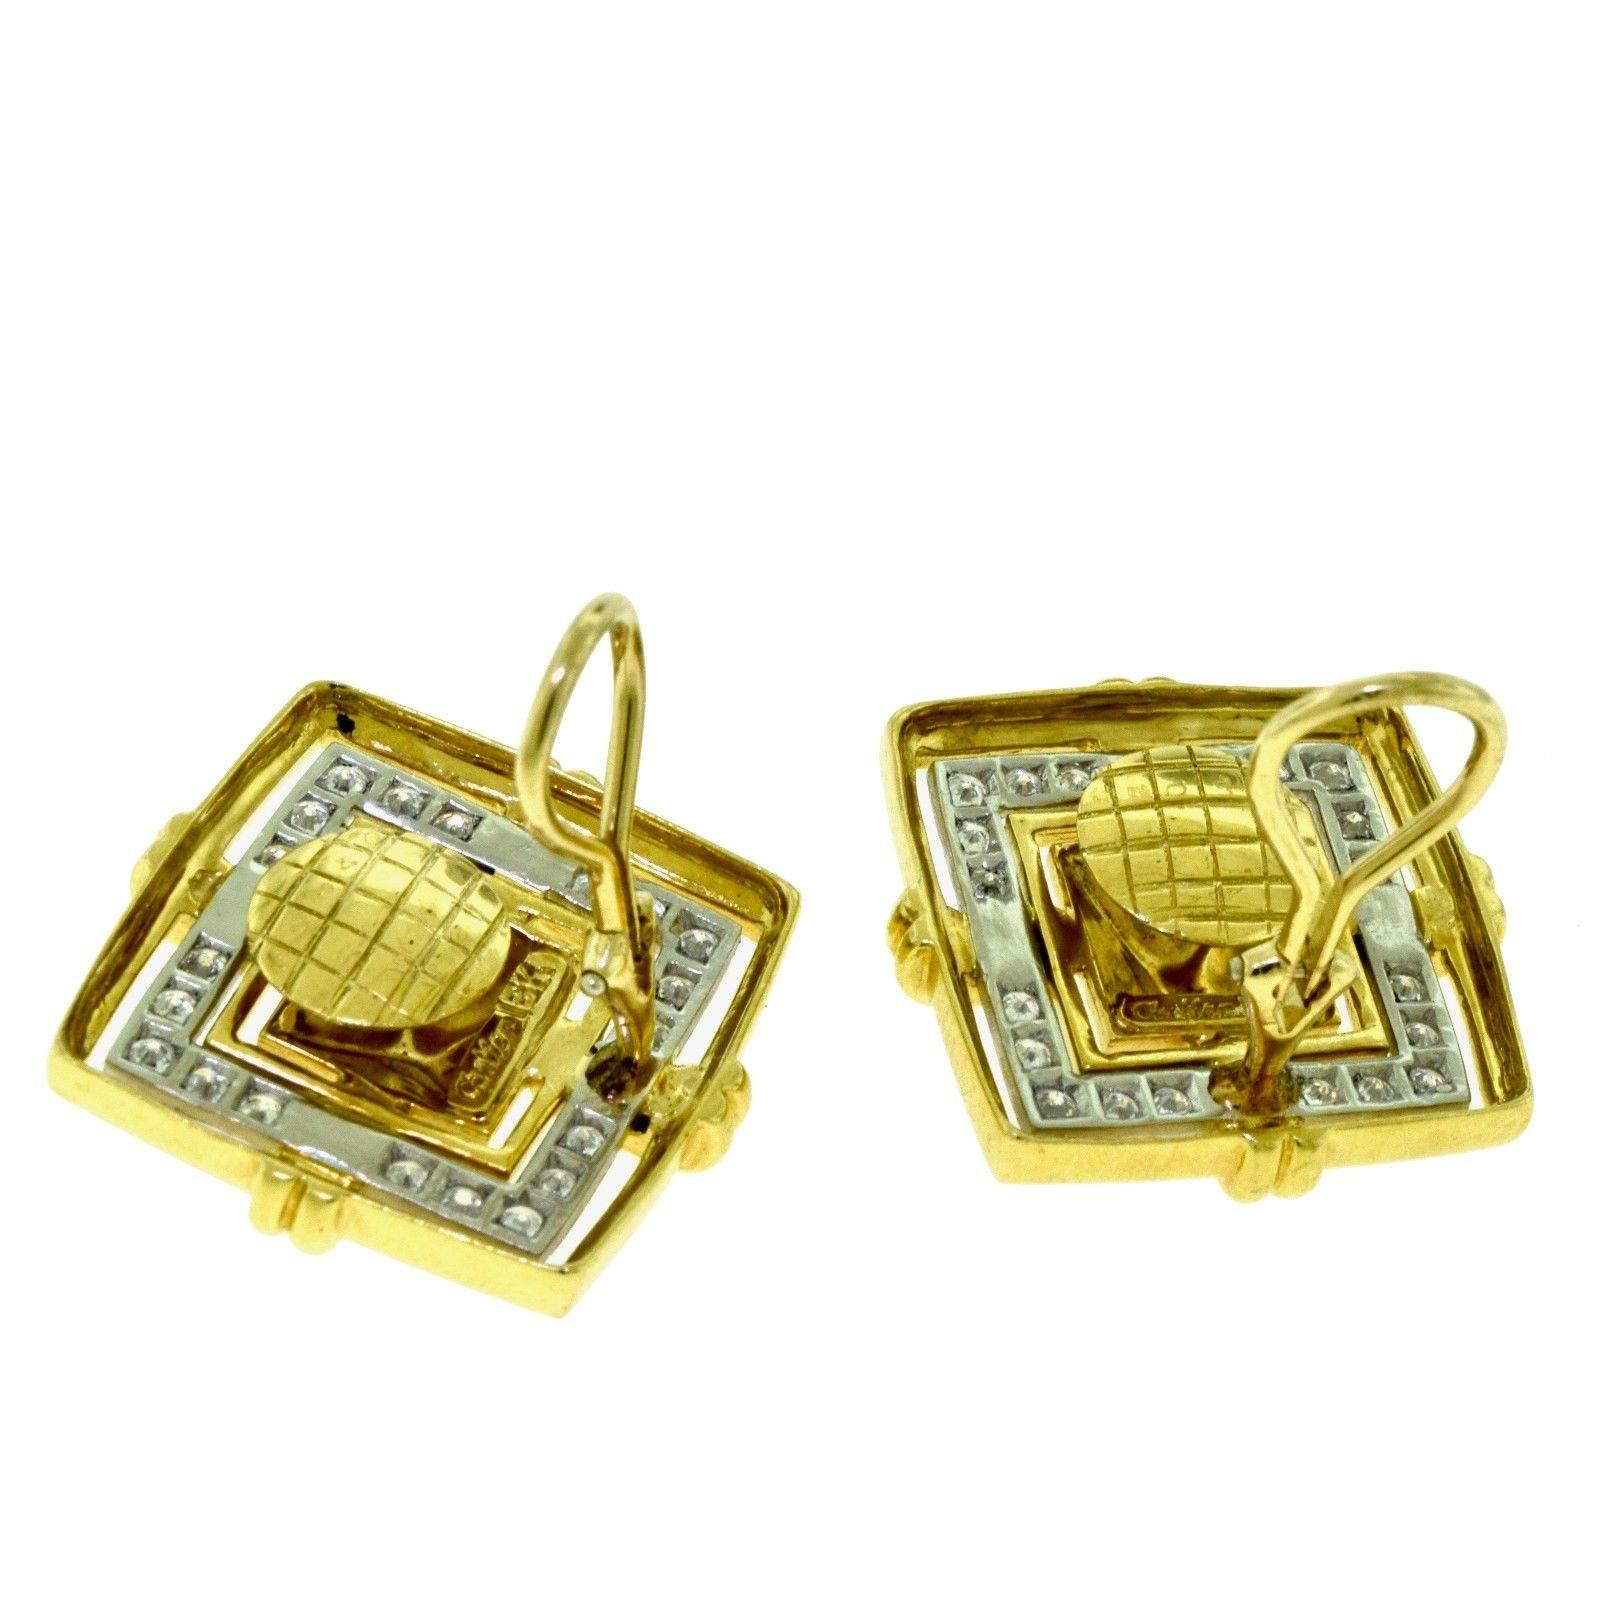 Cartier 18 Karat Yellow Gold Square Pyramid Diamond Earrings In Excellent Condition For Sale In Miami, FL